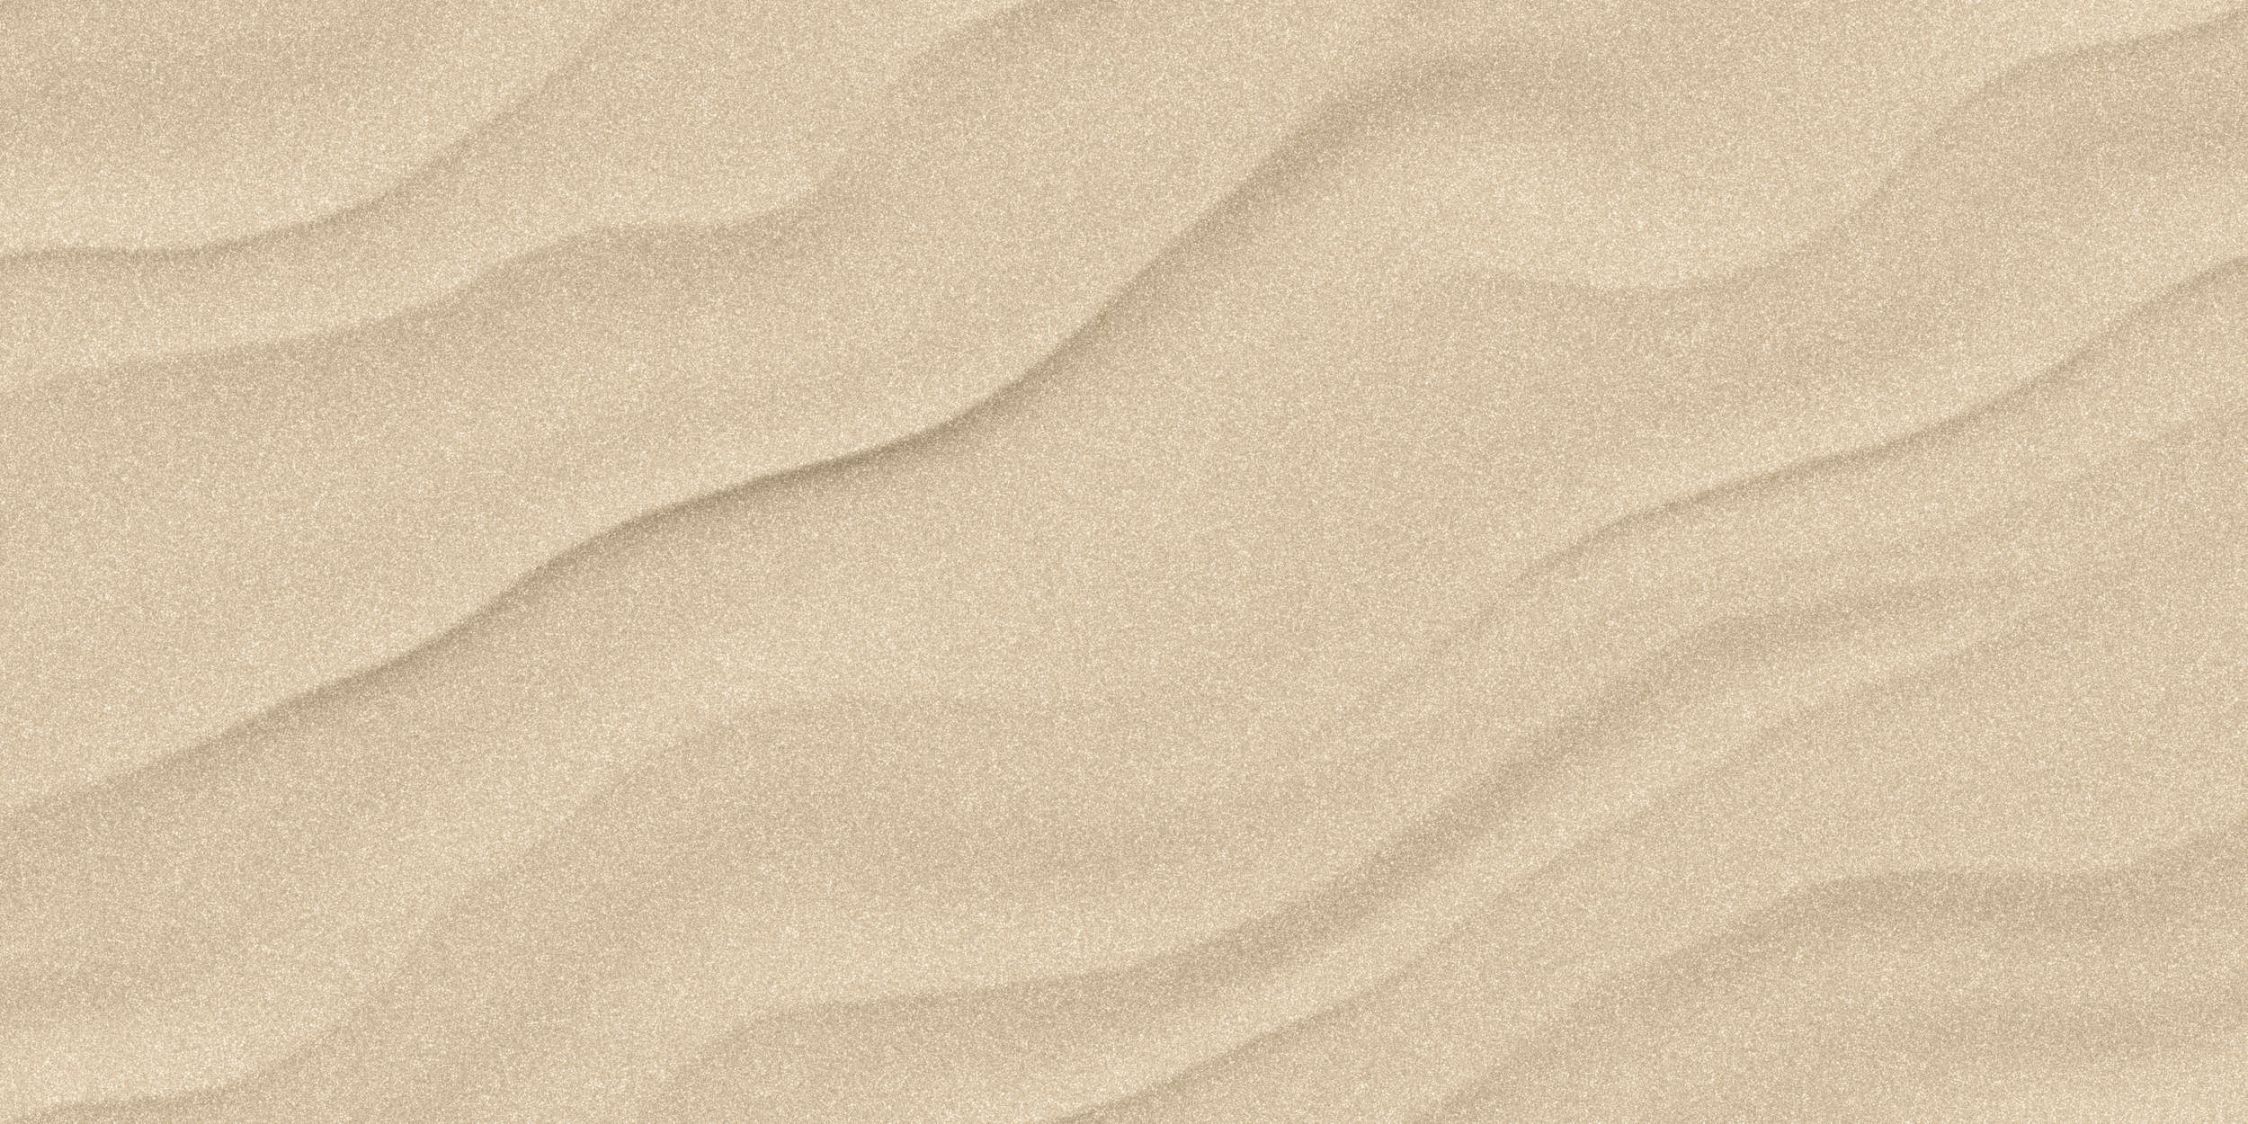             Photo wallpaper »sahara« - Sandy desert floor with a handmade paper look - Smooth, slightly pearlescent non-woven fabric
        